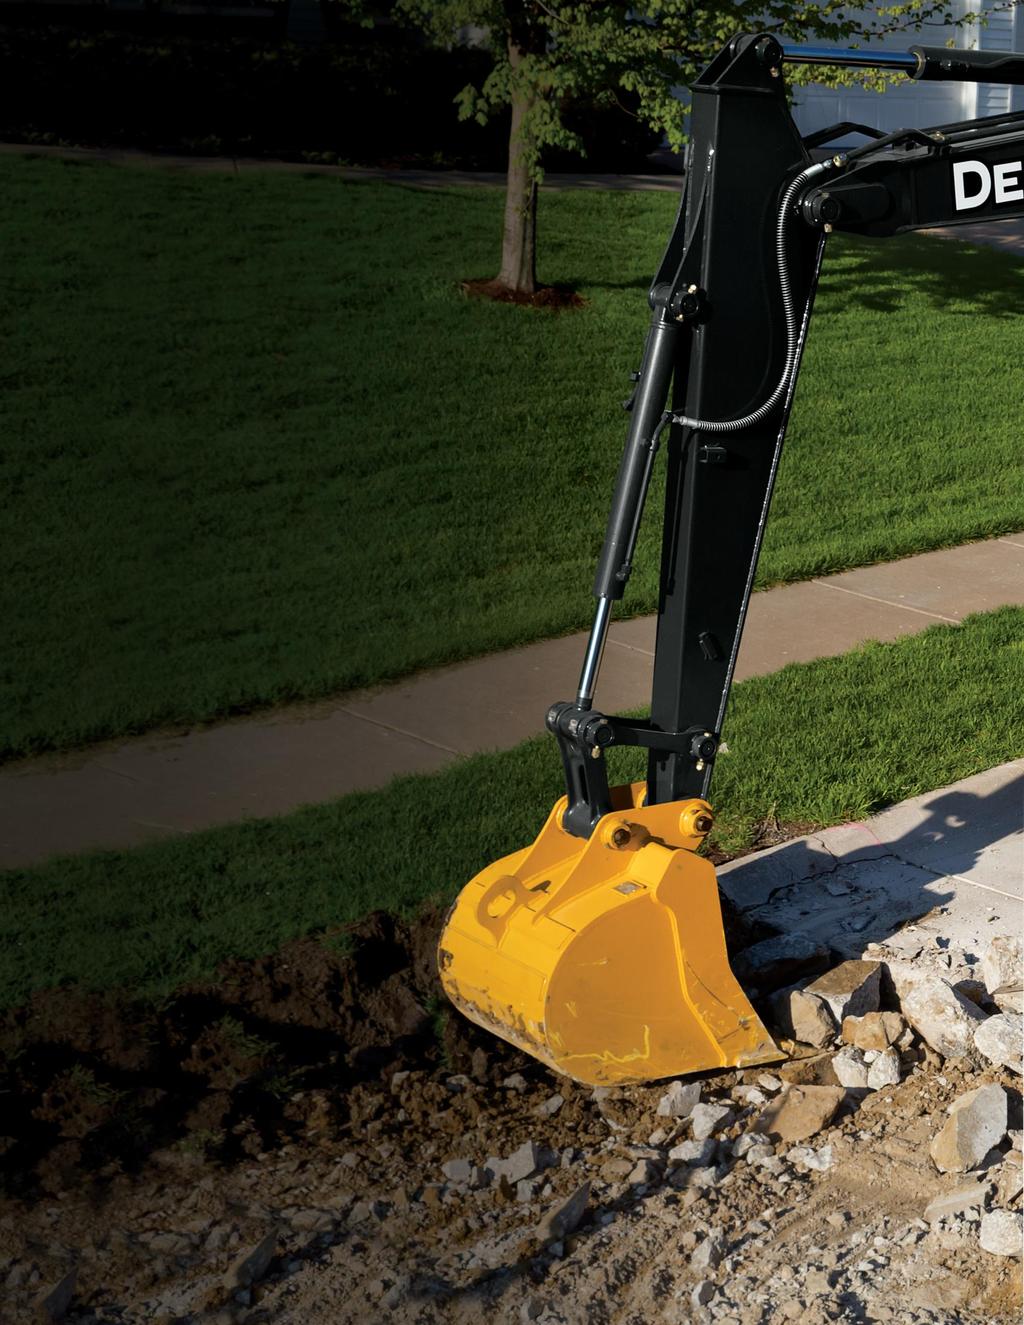 Fit in more productivity. Neither too big nor too small, these right-size excavators are the perfect solution for a wide variety of tasks.